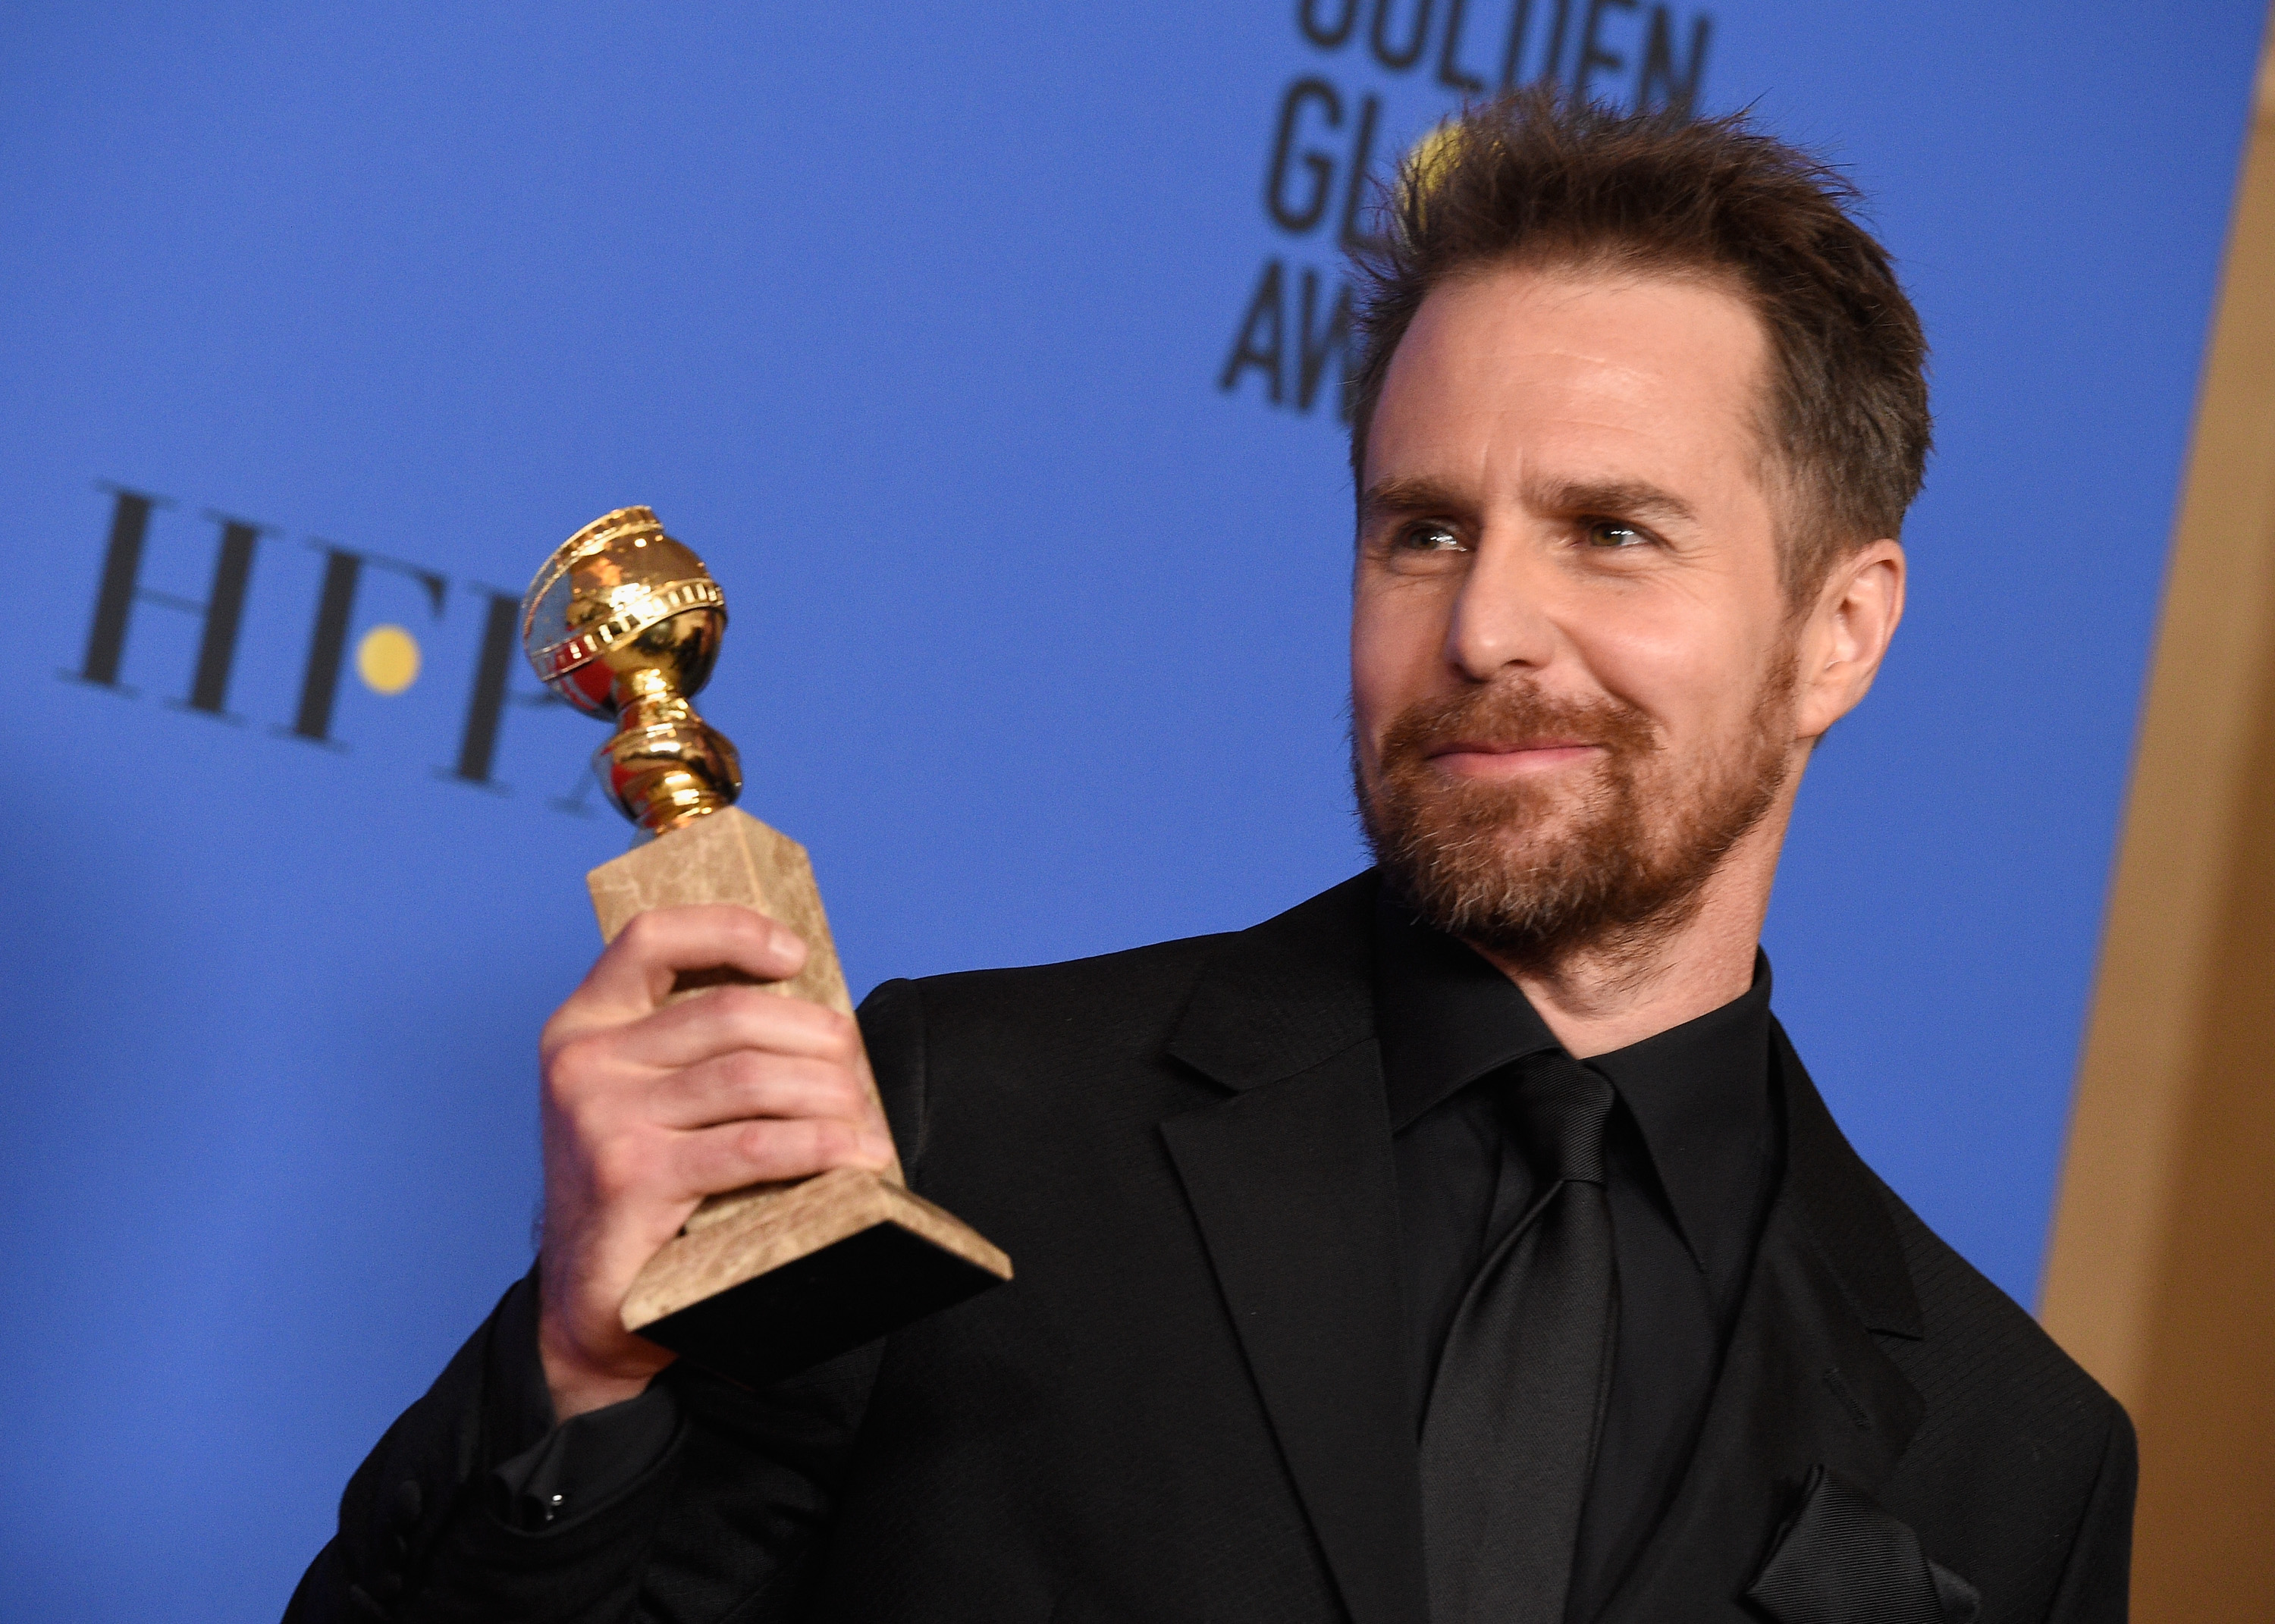 Sam Rockwell poses with best supporting actor award for 'Three Billboards Outside Ebbing, Missouri' at the 75th Annual Golden Globe Awards on January 7, 2018. (Kevork Djansezian/NBC—NBCU Photo Bank via Getty Images)